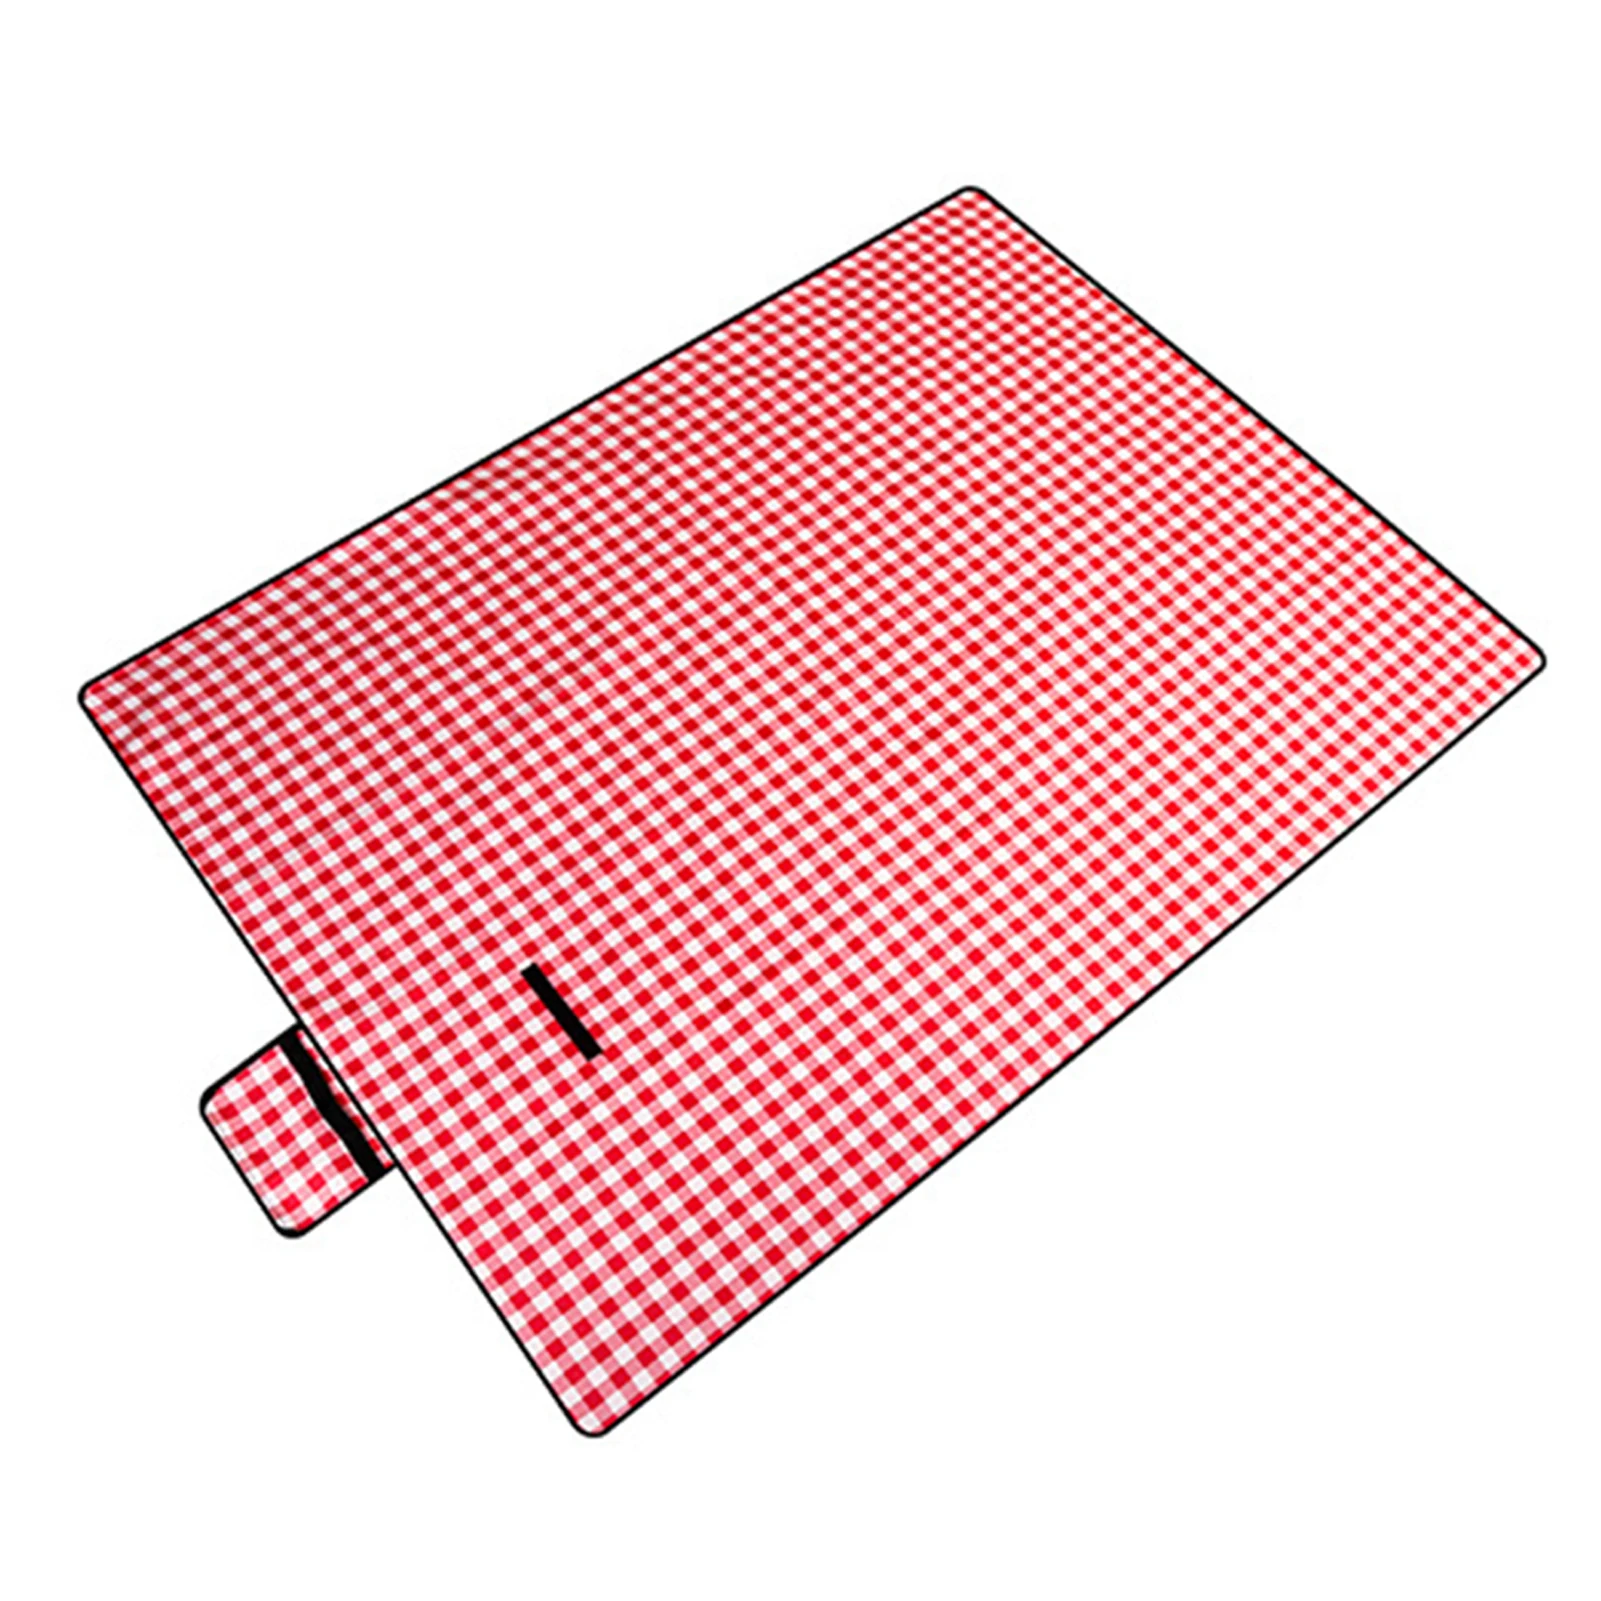 

Picnic Mat Beach Blanket Camping Fireproof Grill Mat With Handle Fashion Thicken Pad Waterproof Handy Mat For Outdoors Barbecue